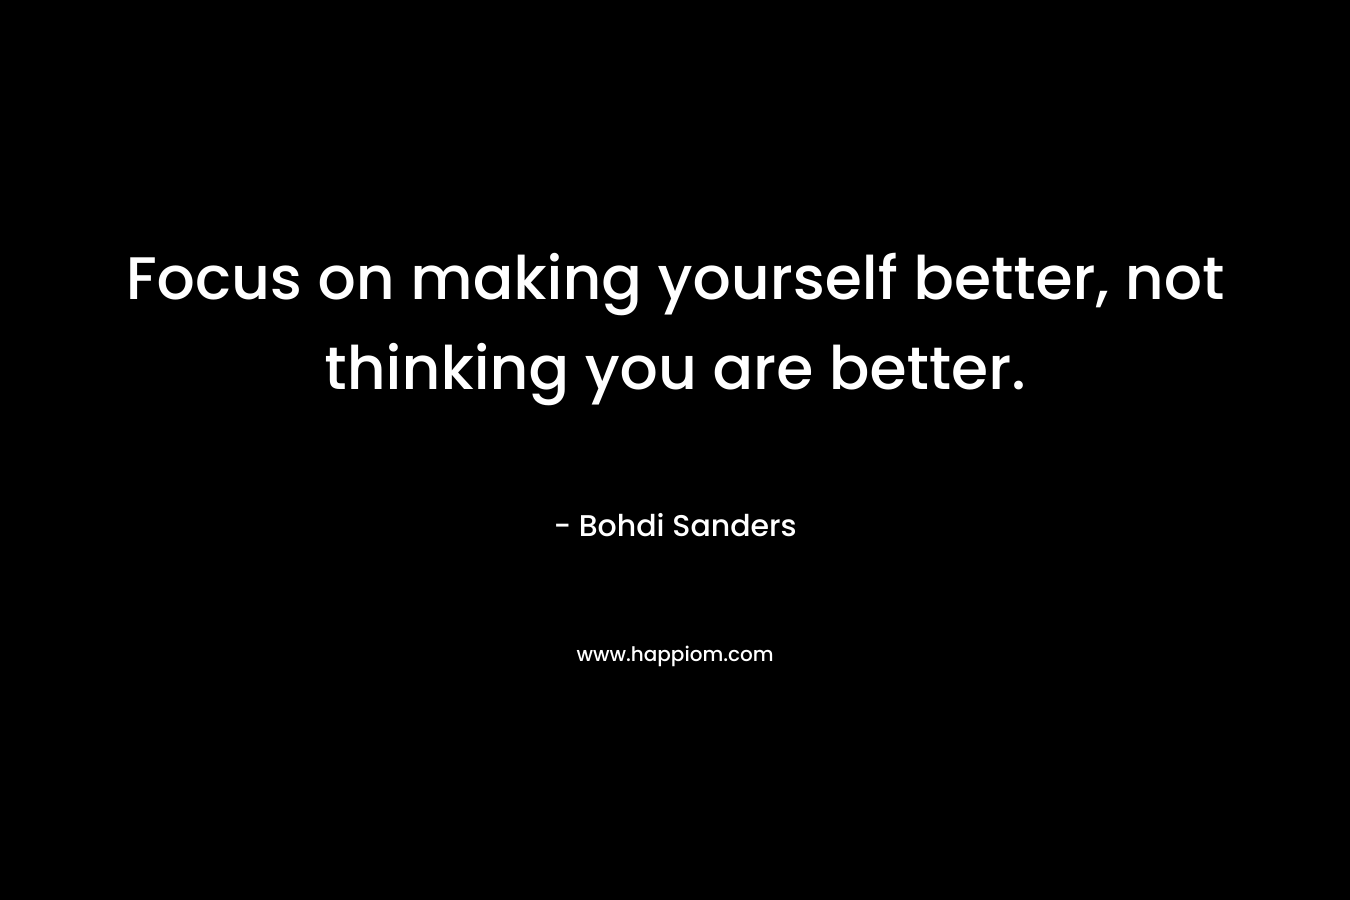 Focus on making yourself better, not thinking you are better.